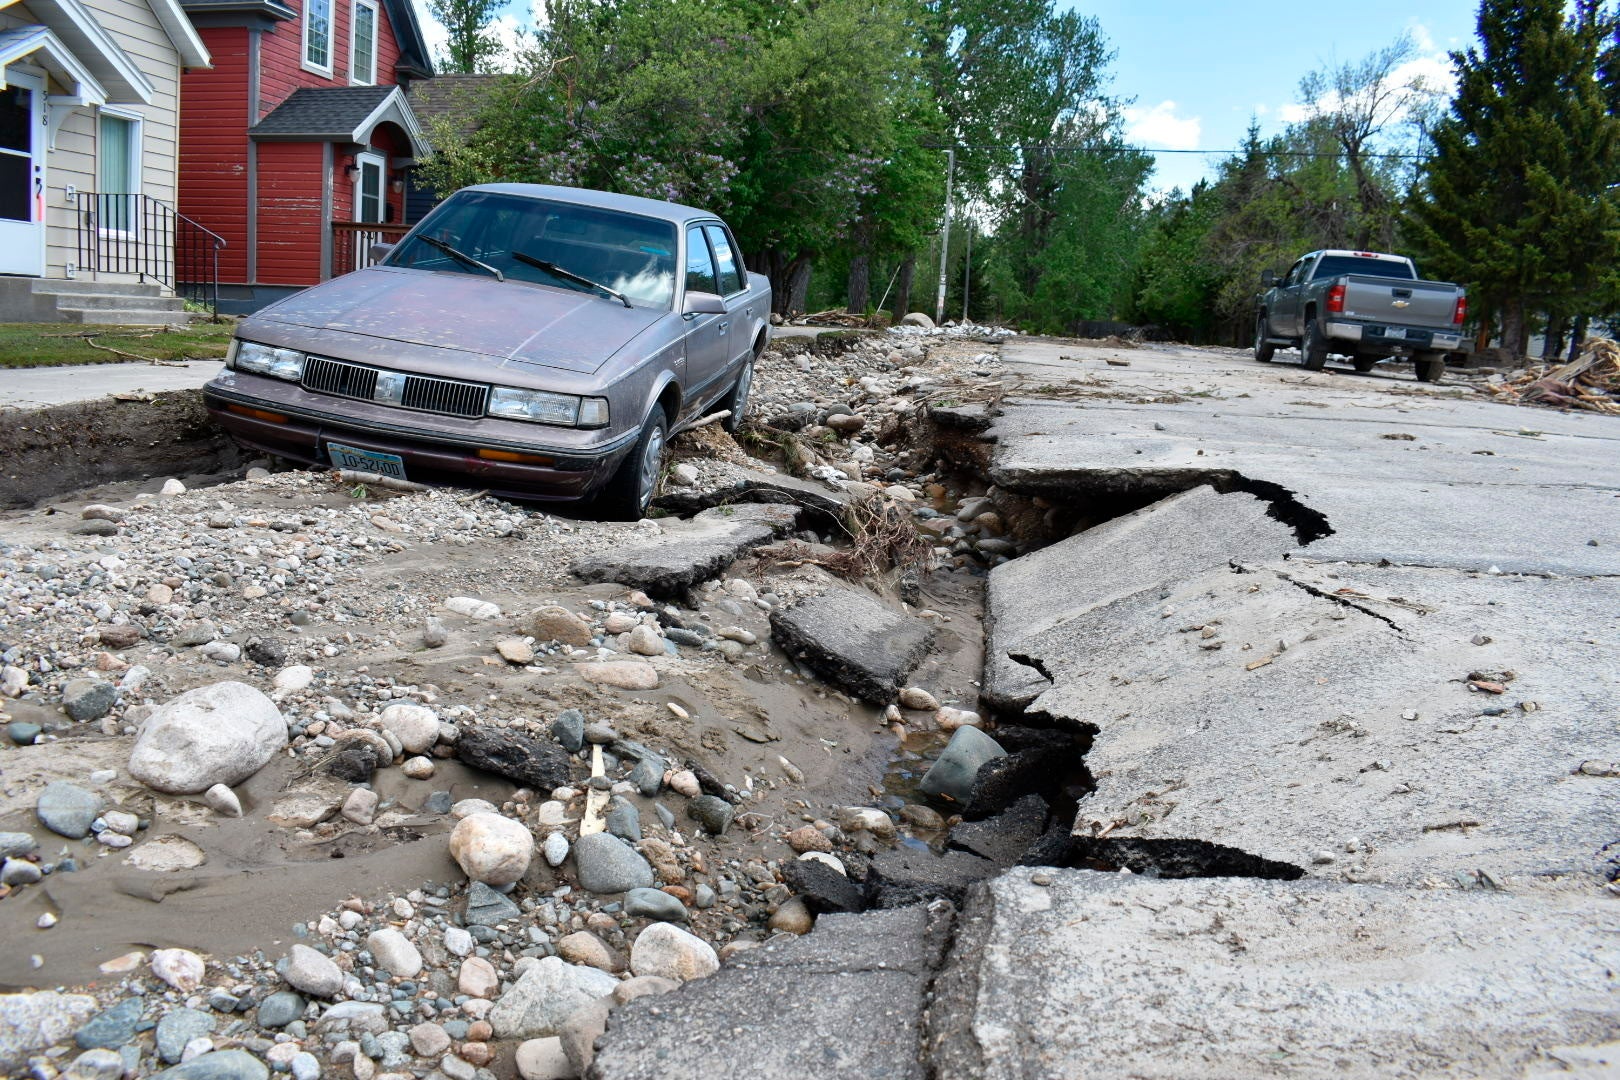 Flood damage is seen along a street Tuesday, June 14, 2022, in Red Lodge, Mont. (Photo: Matthew Brown, AP)